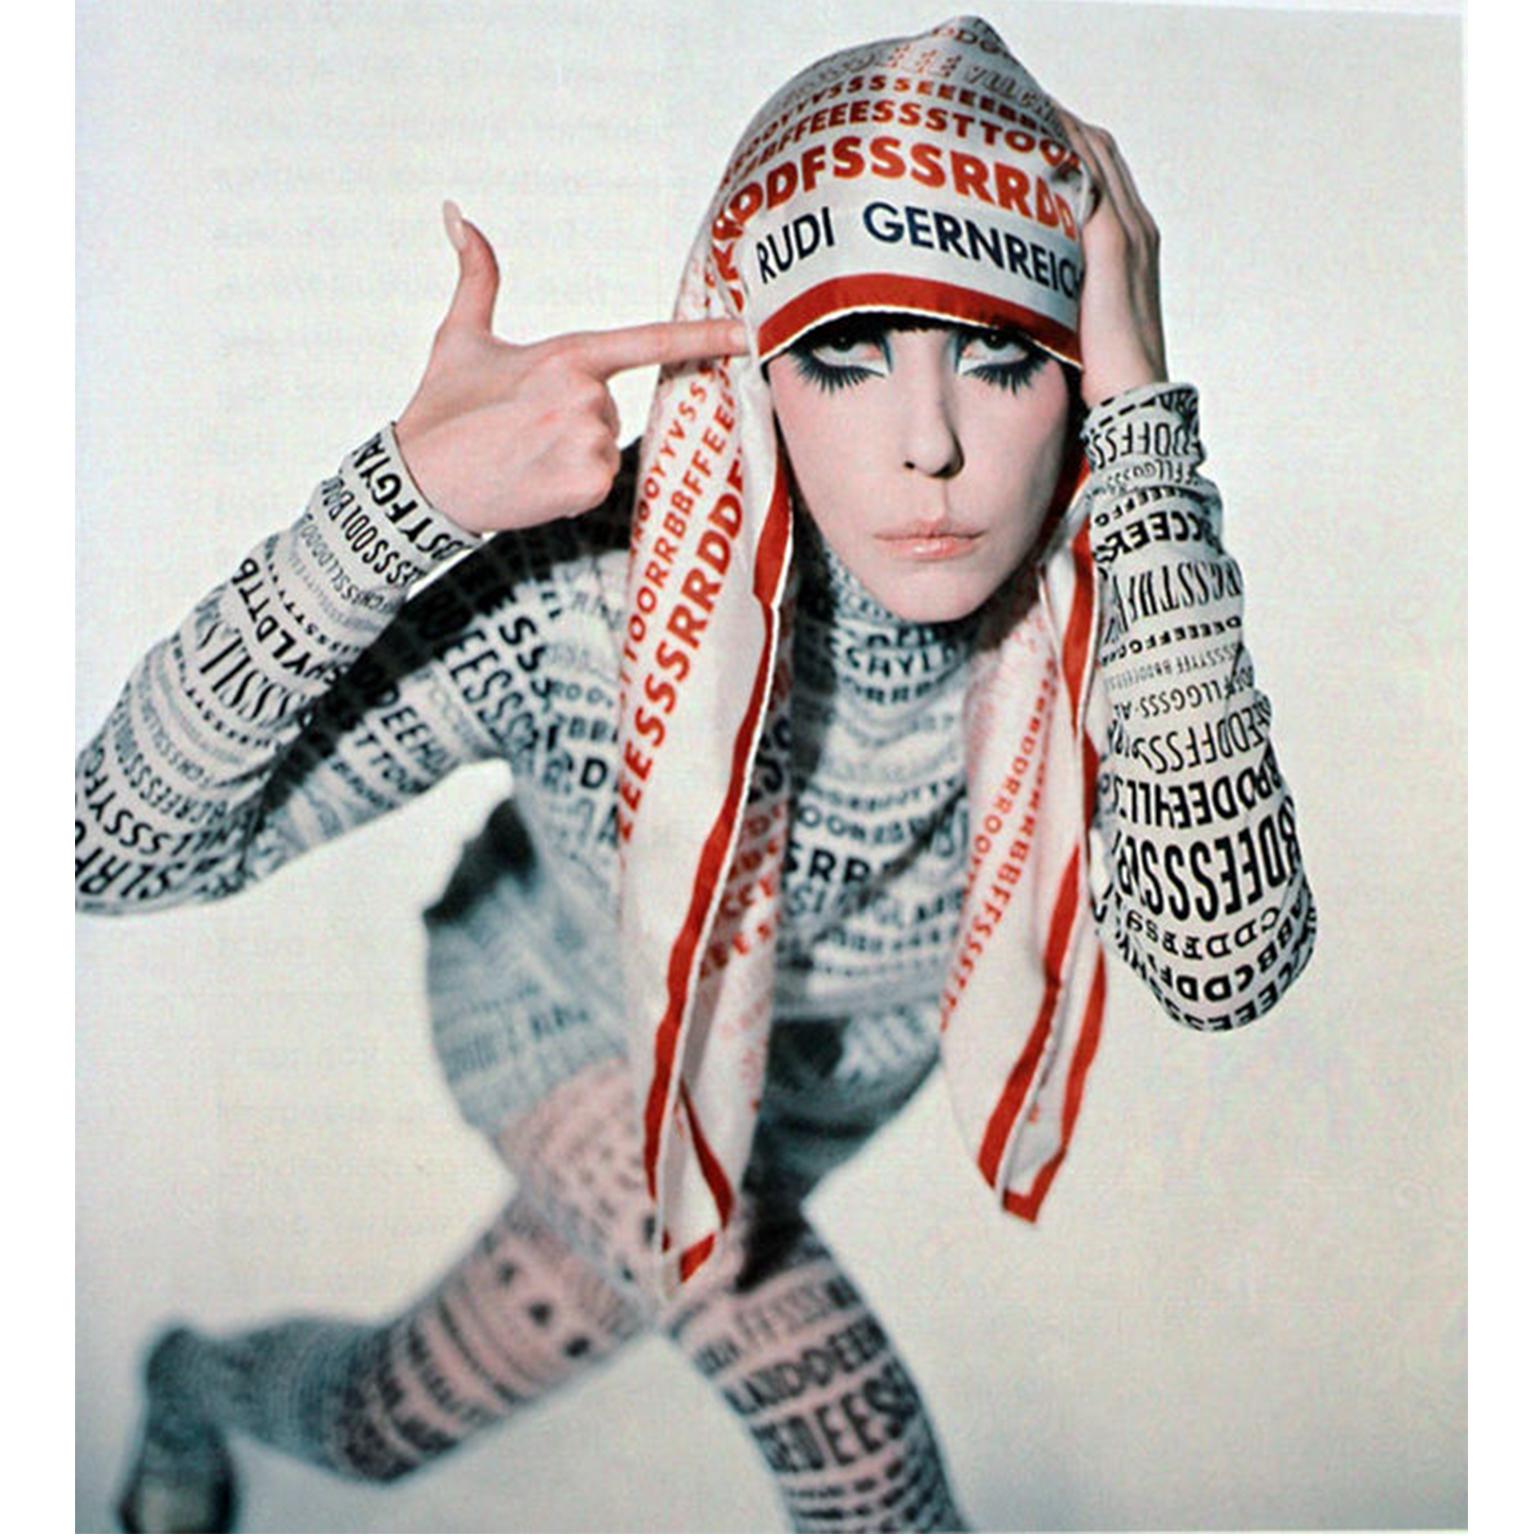 This is a rare vintage 1968 silk alphabet scarf designed by Rudi Gernreich and a different one from the same collection was modeled by Peggy Moffitt in one of her more iconic photos. The scarf has rows of different fonts in blue and one row in dark